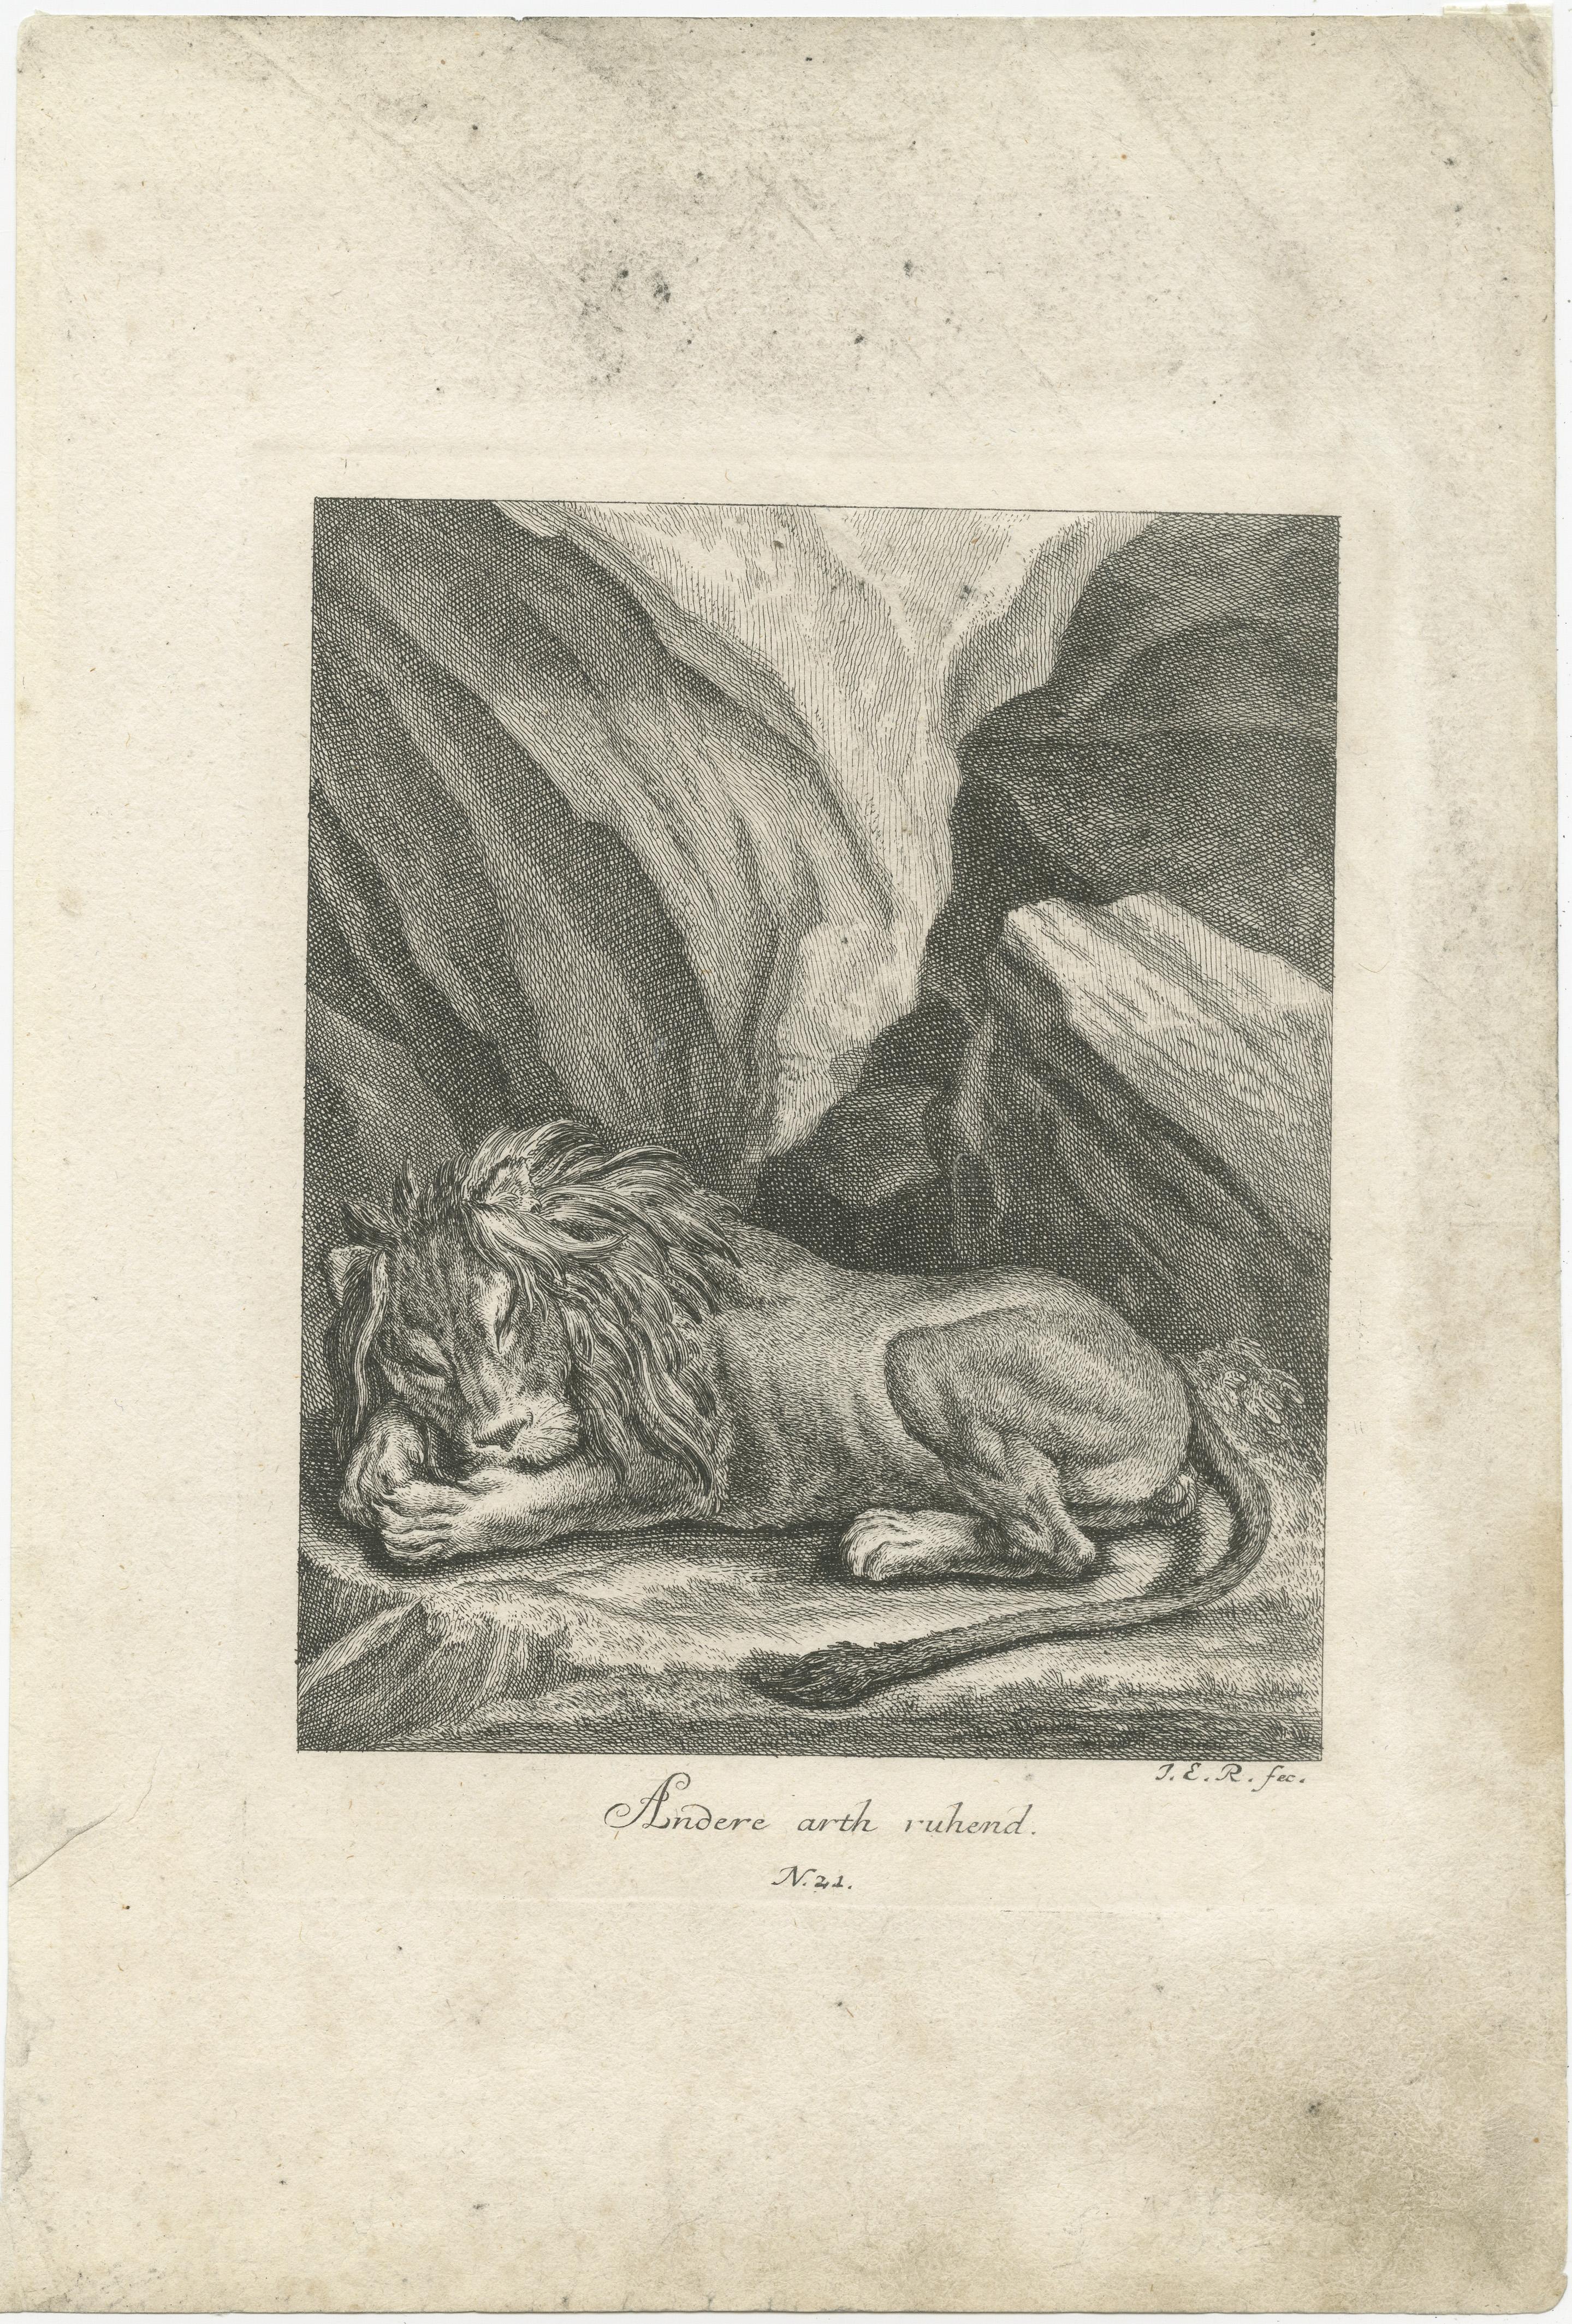 Original antique print titled 'Andere arth ruhend'. Old print of a sleeping lion in a mountainous landscape. Published by J. E. Ridinger, circa 1730. 